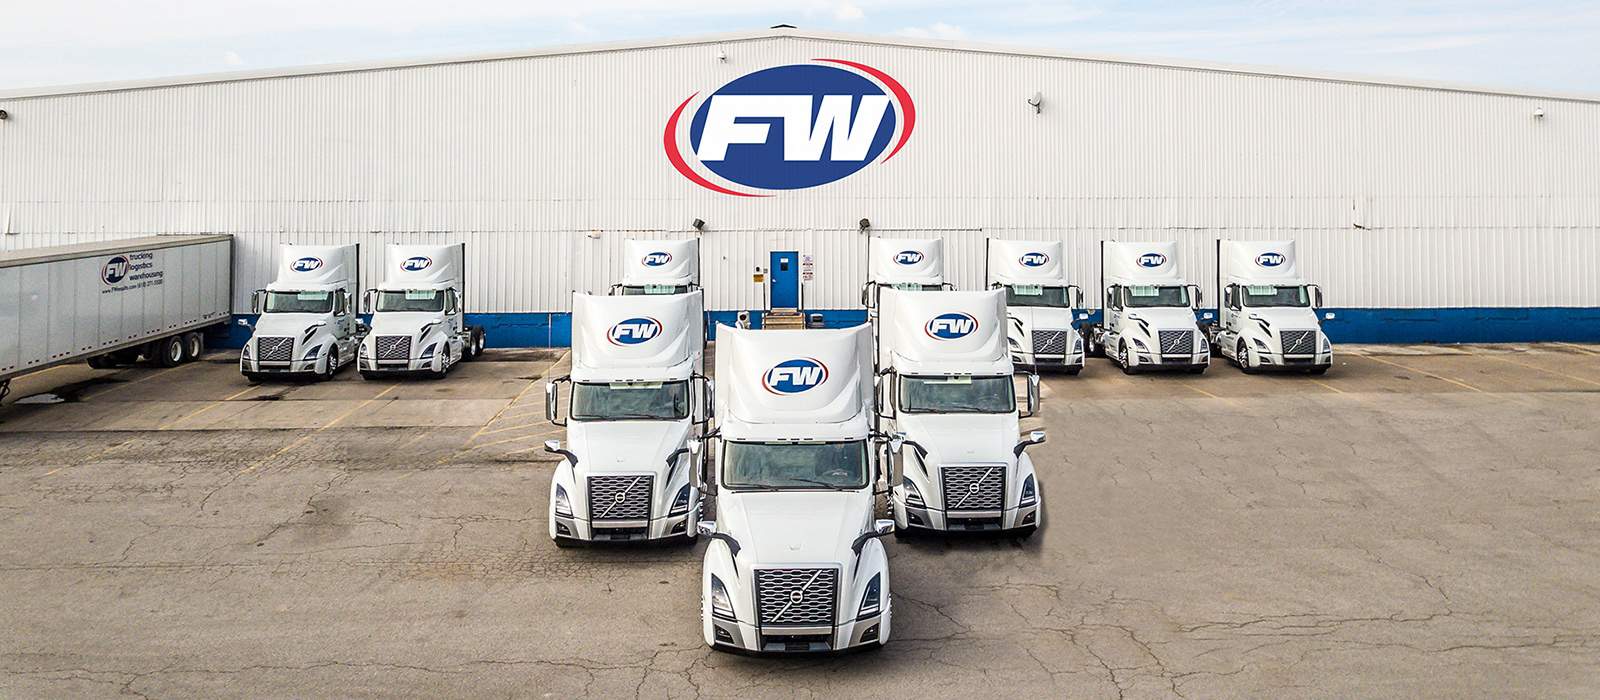 Freight Consolidation Packages On Shelves | FW Logistics